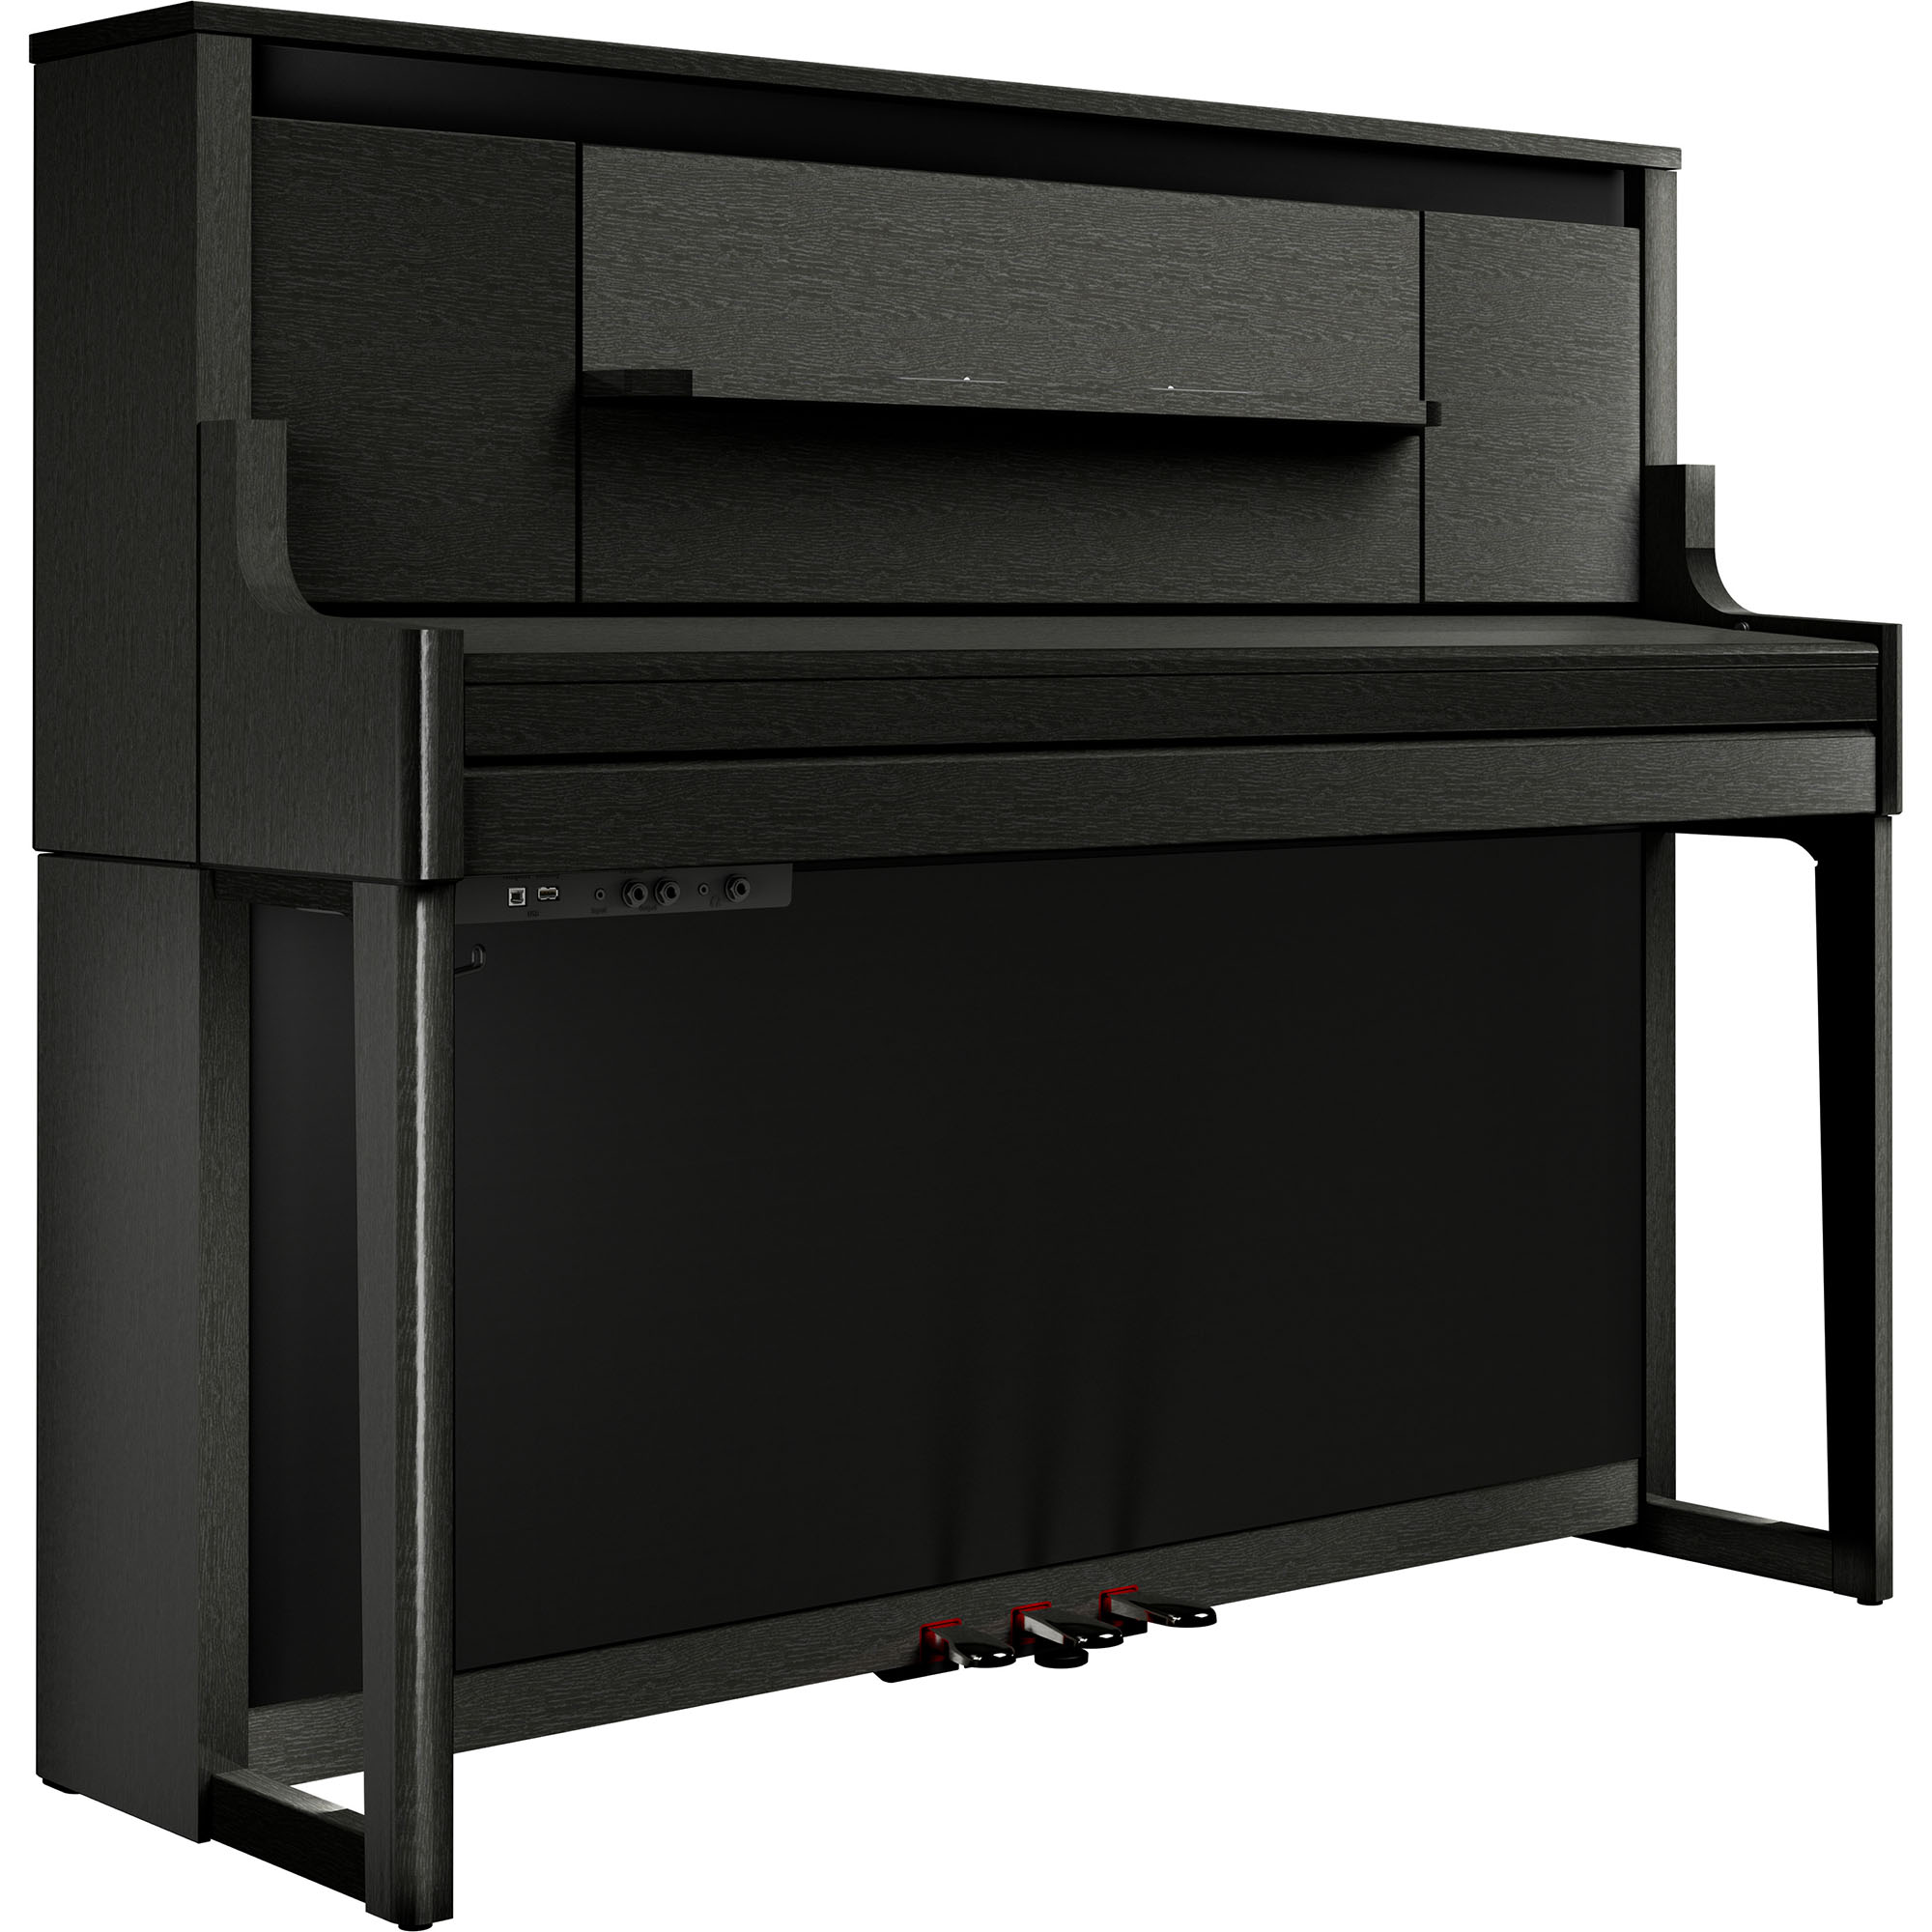 Roland Lx-9-ch - Charcoal Black - Digital piano with stand - Variation 1